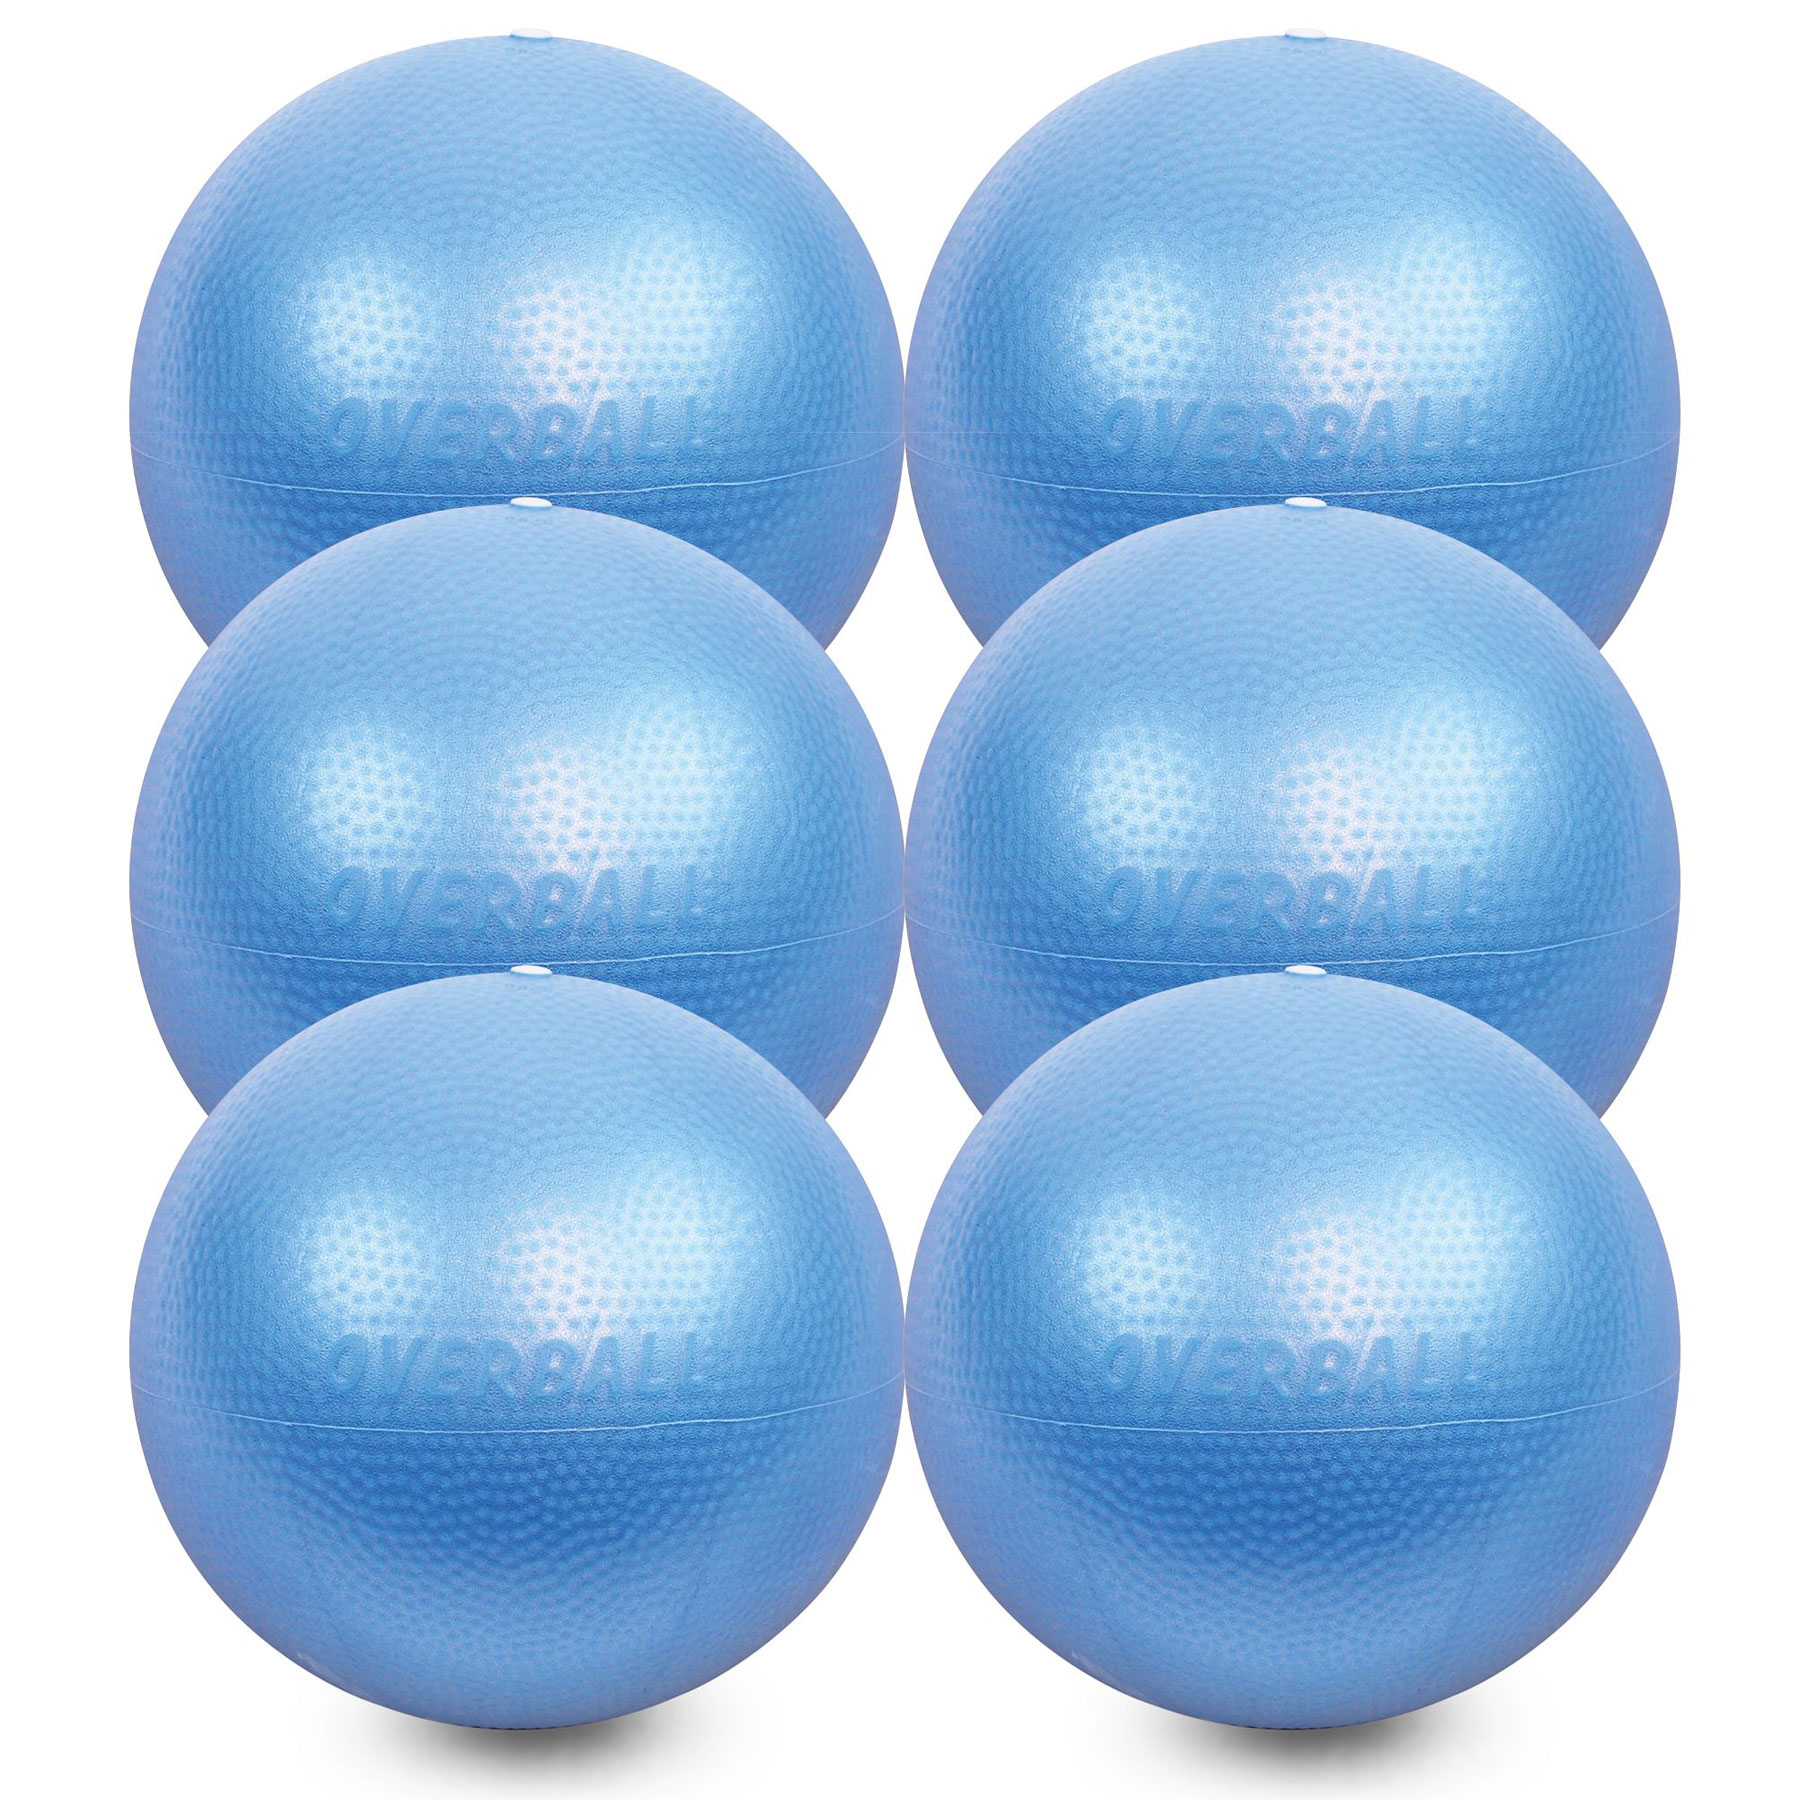 Overball - Set of 6